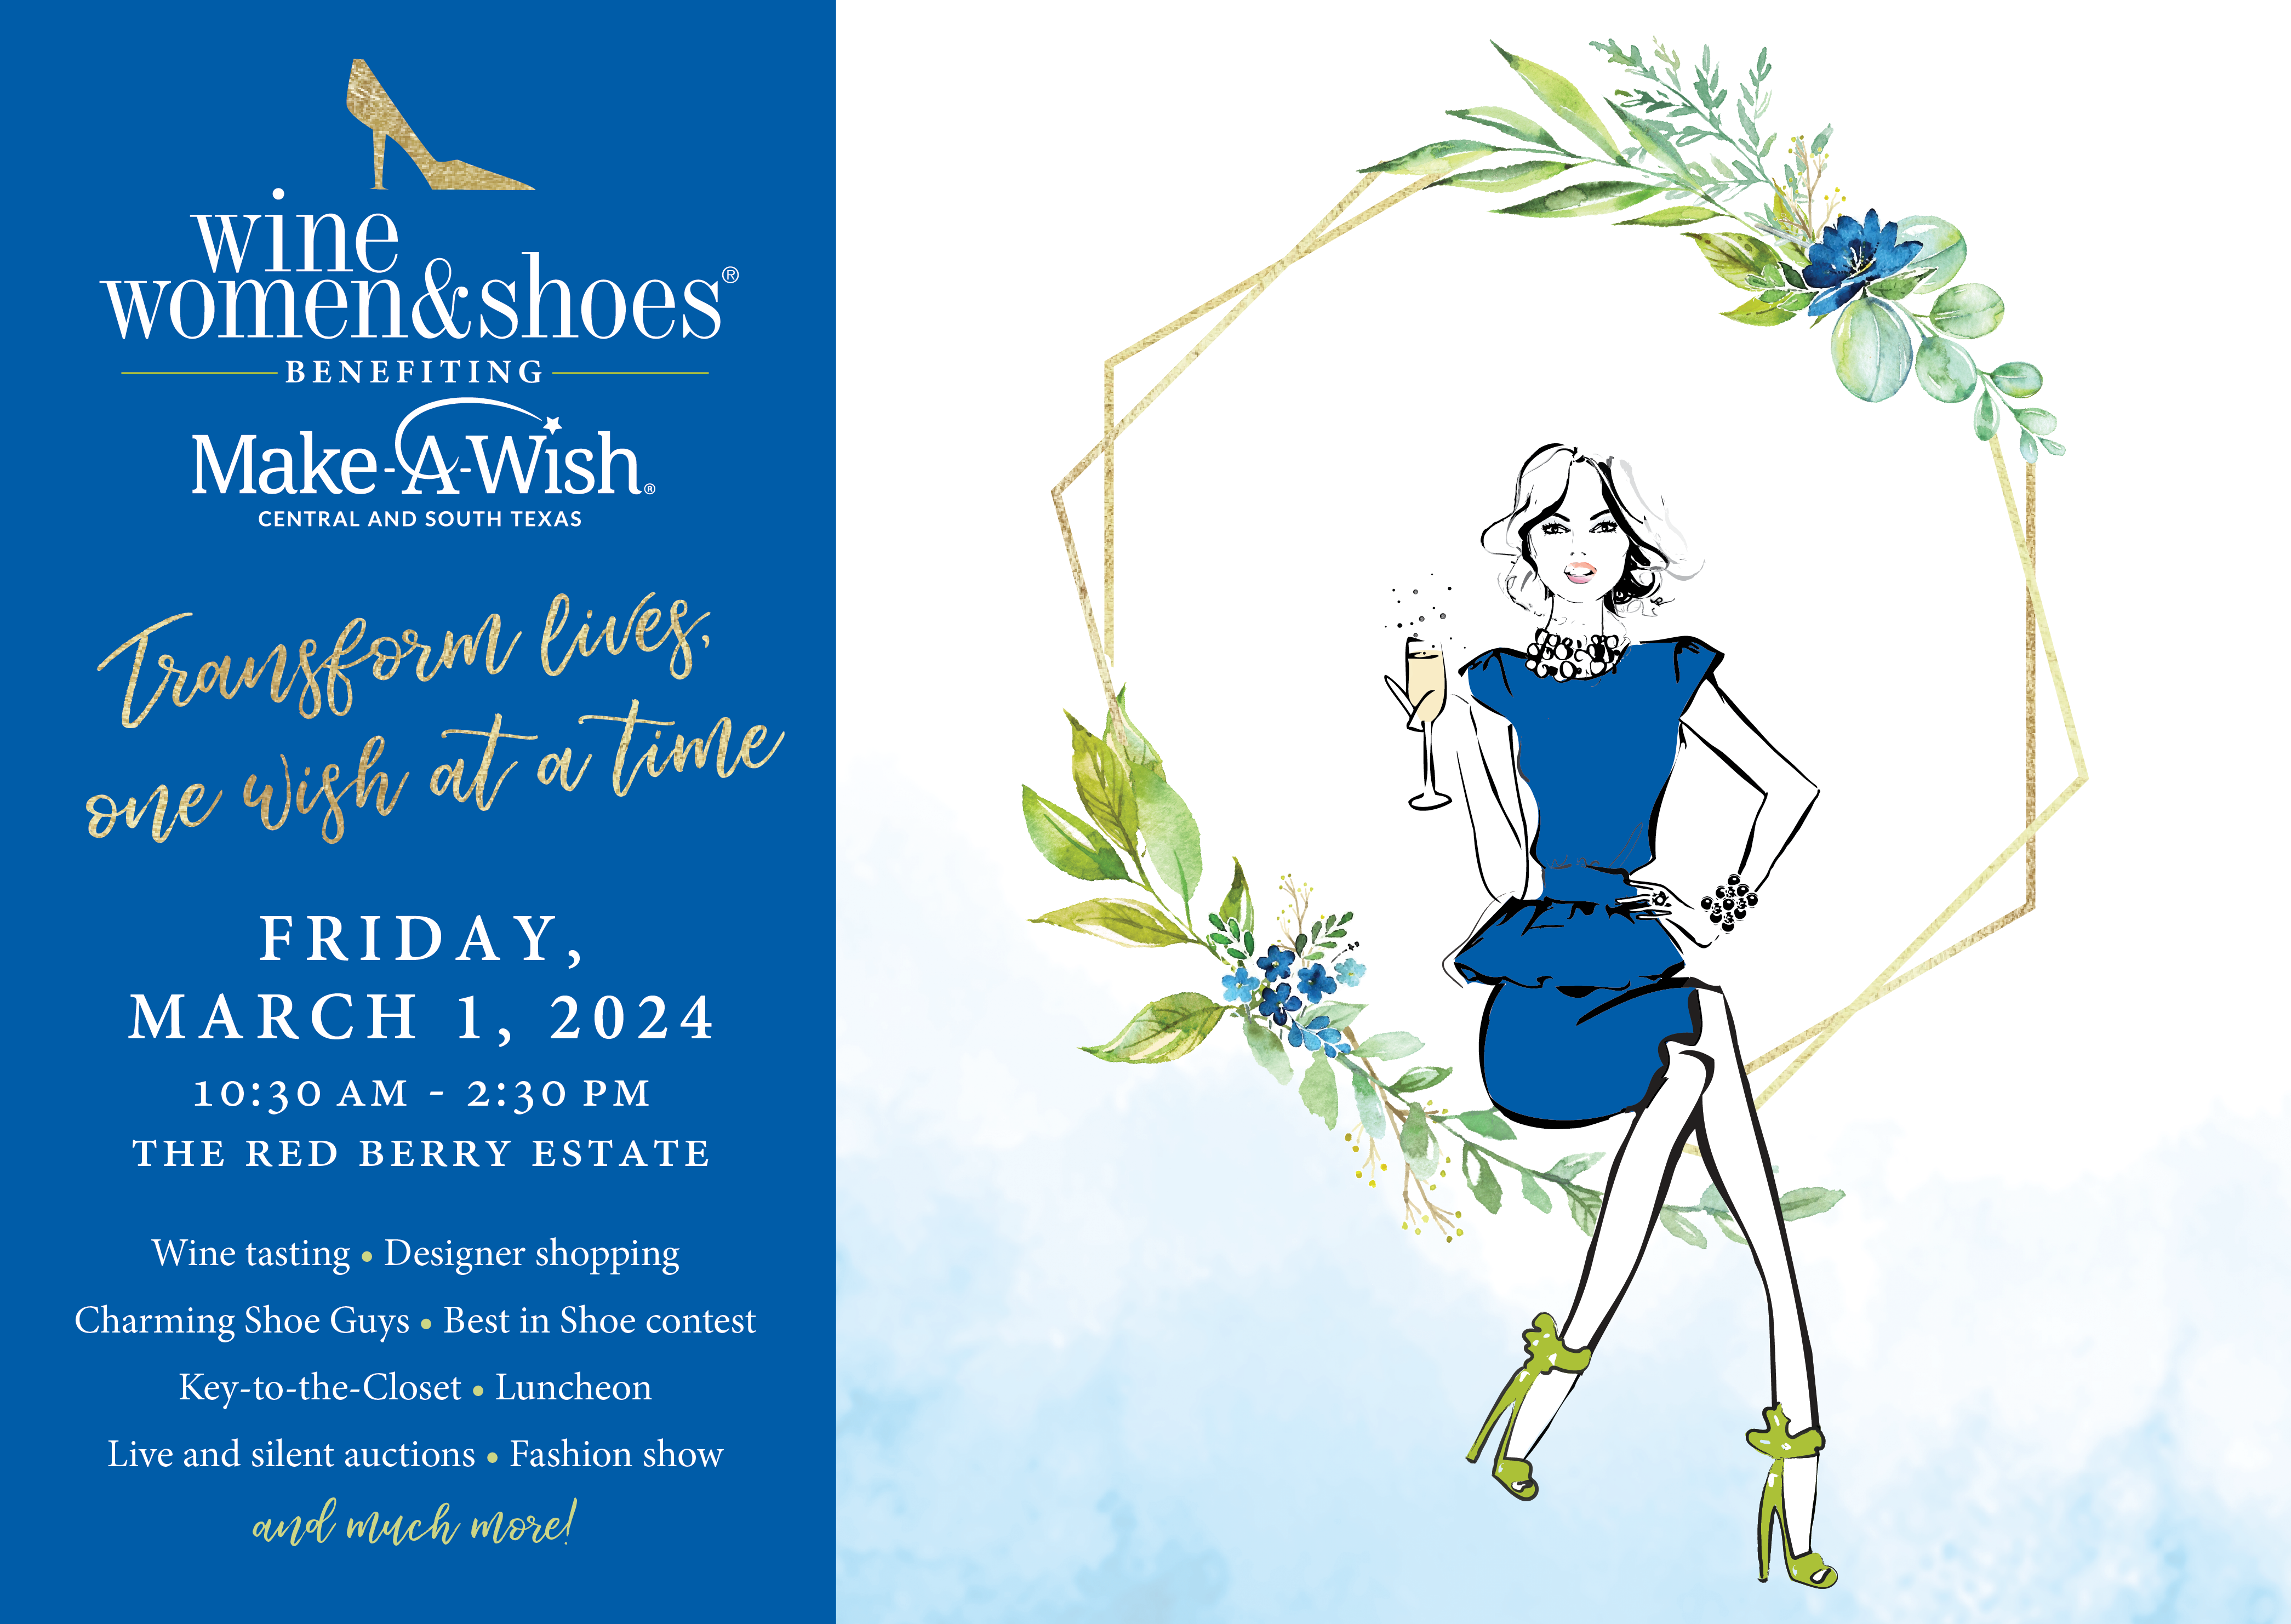 Want free tickets to attend Amarillo's 1st Wine Women & Shoes